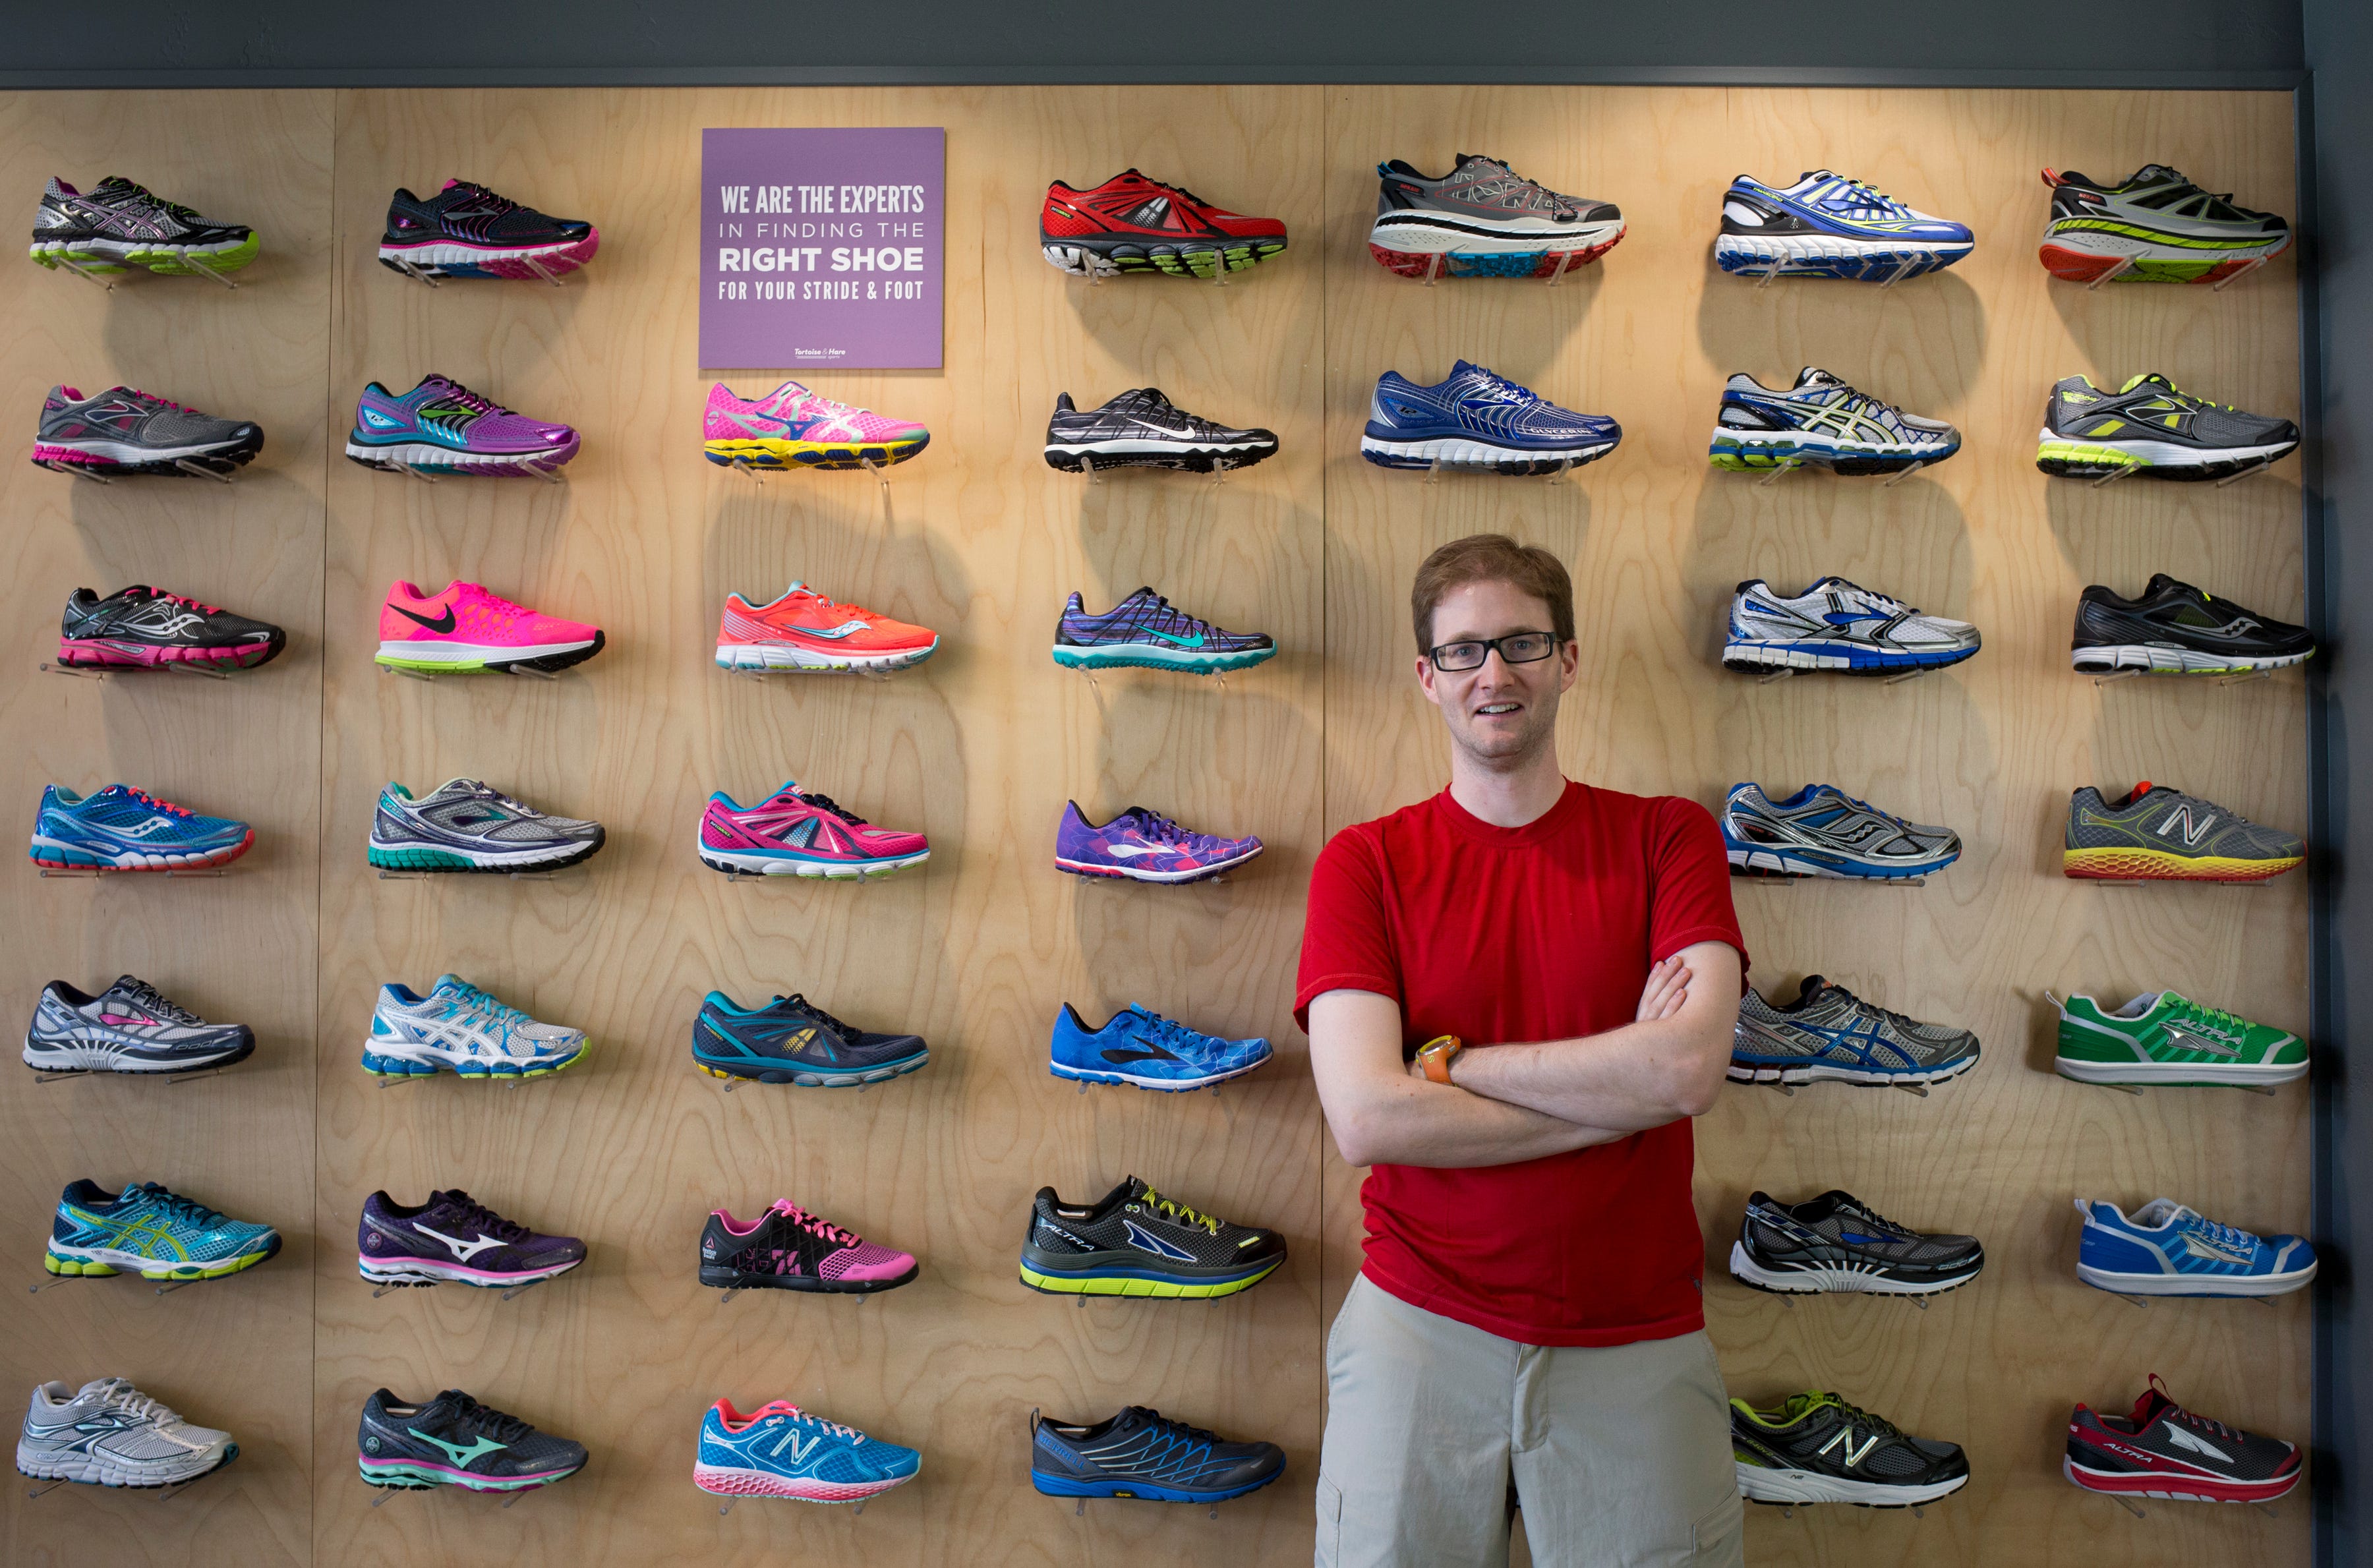 Running store owner wants people to 